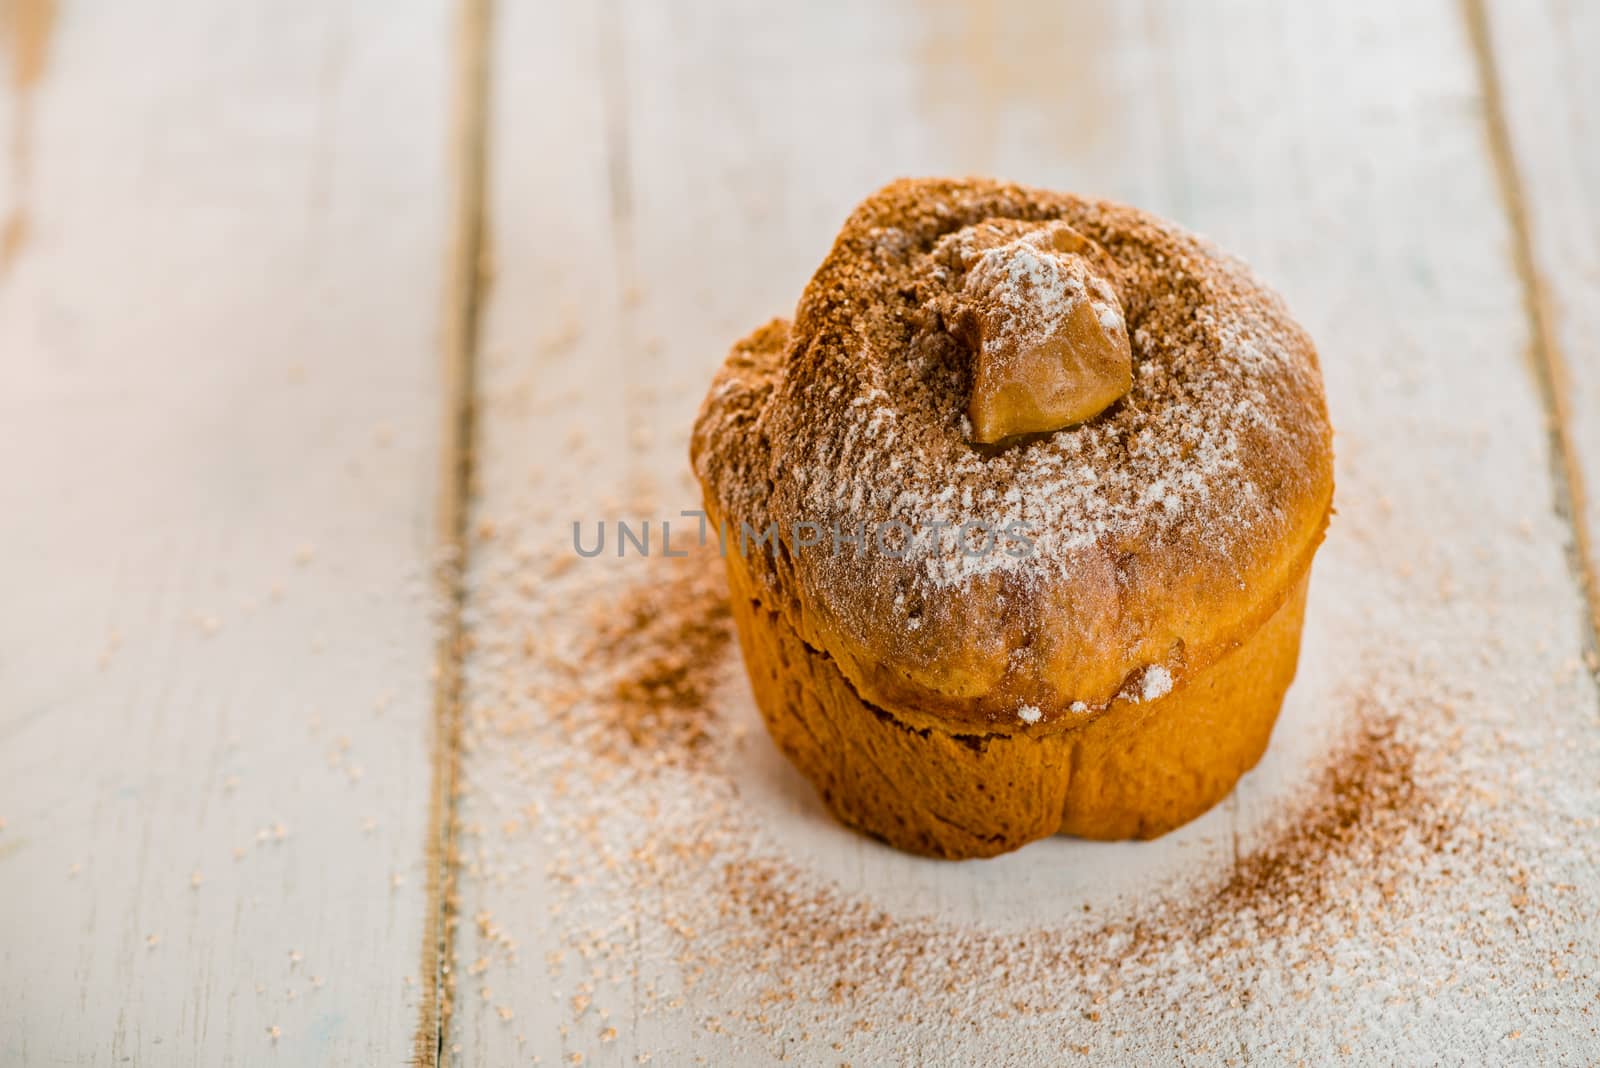 Small cakes with apple powdered with cinnamon and sugar on white wood table